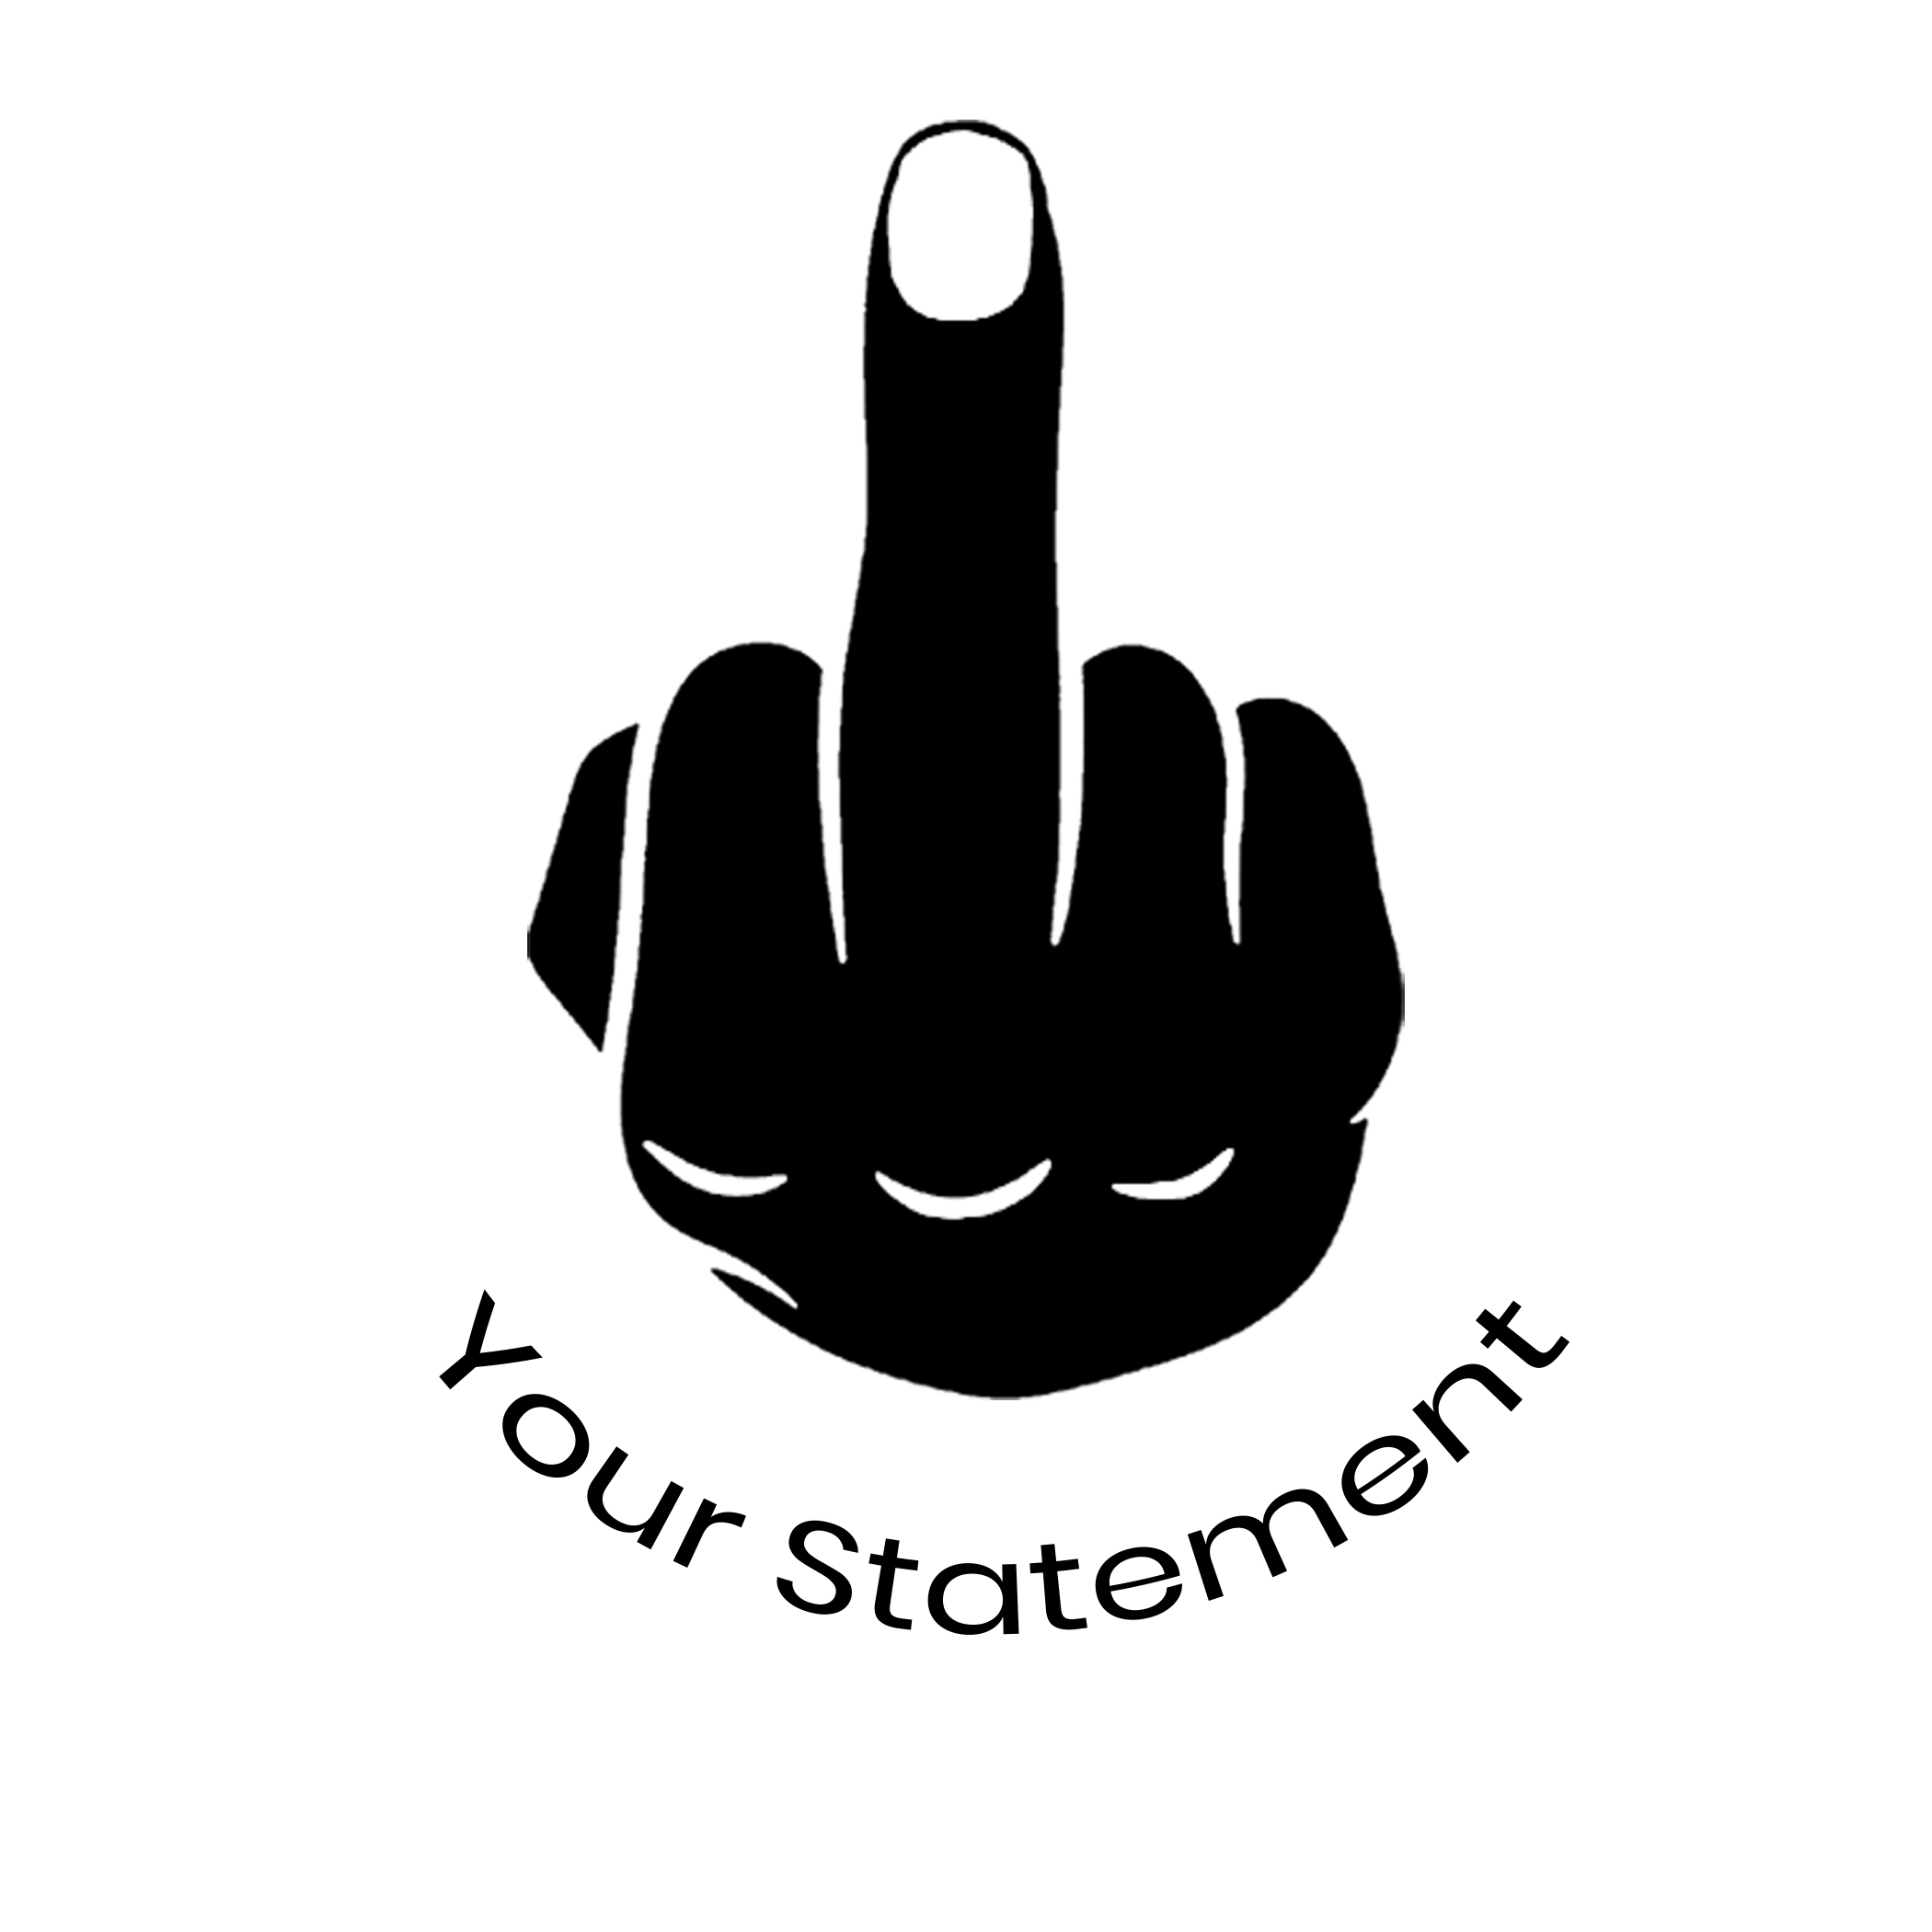 CUSTOMIZE YOUR OWN Flip Off Middle Finger 7″ x 7″ Window Sticker